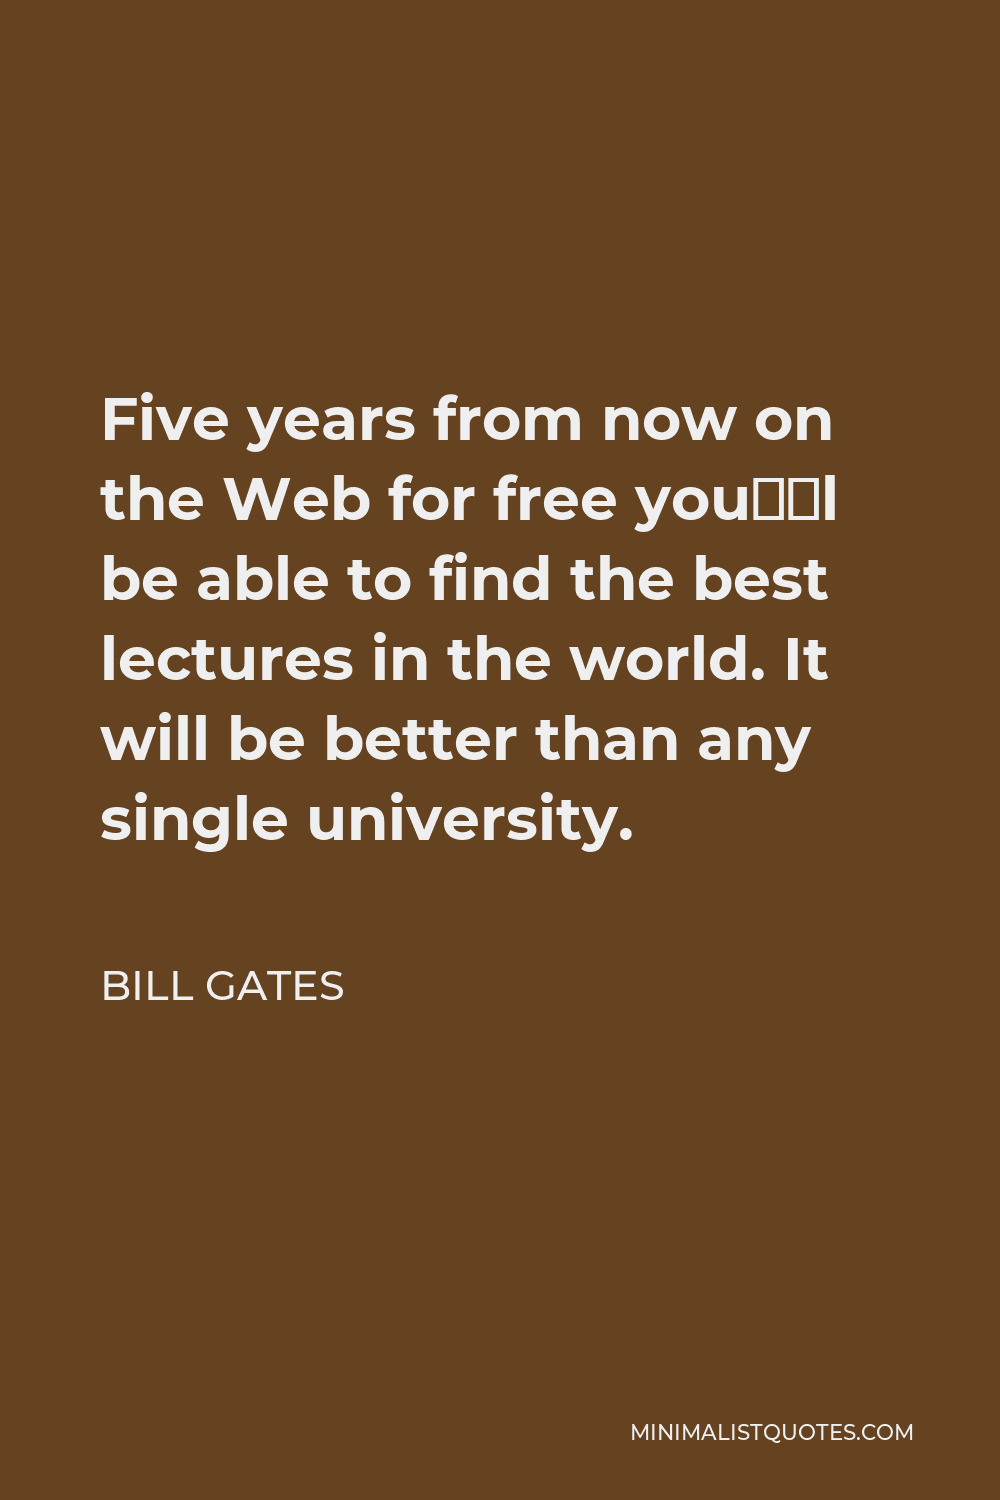 Bill Gates Quote - Five years from now on the Web for free you’ll be able to find the best lectures in the world. It will be better than any single university.